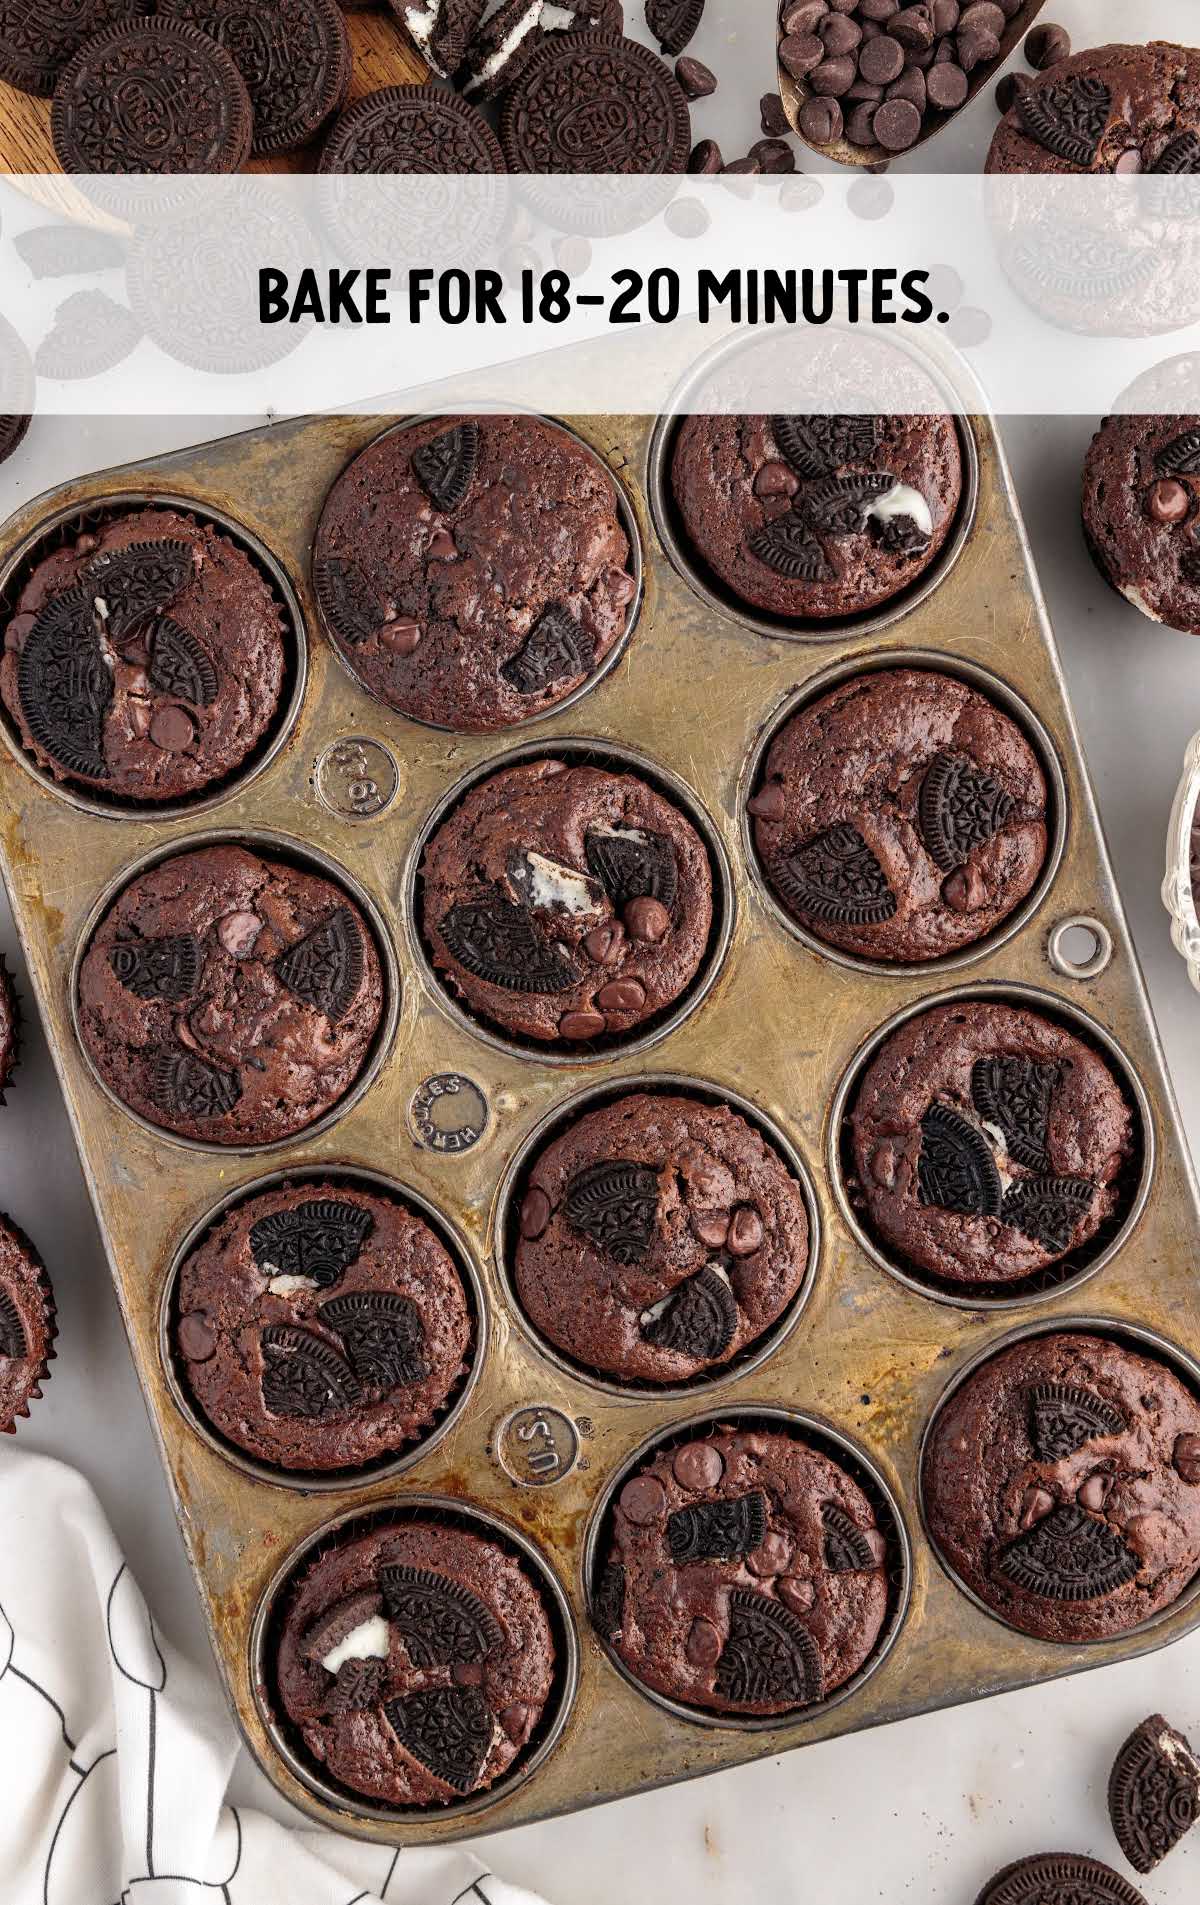 muffins baked for 18-20 minutes